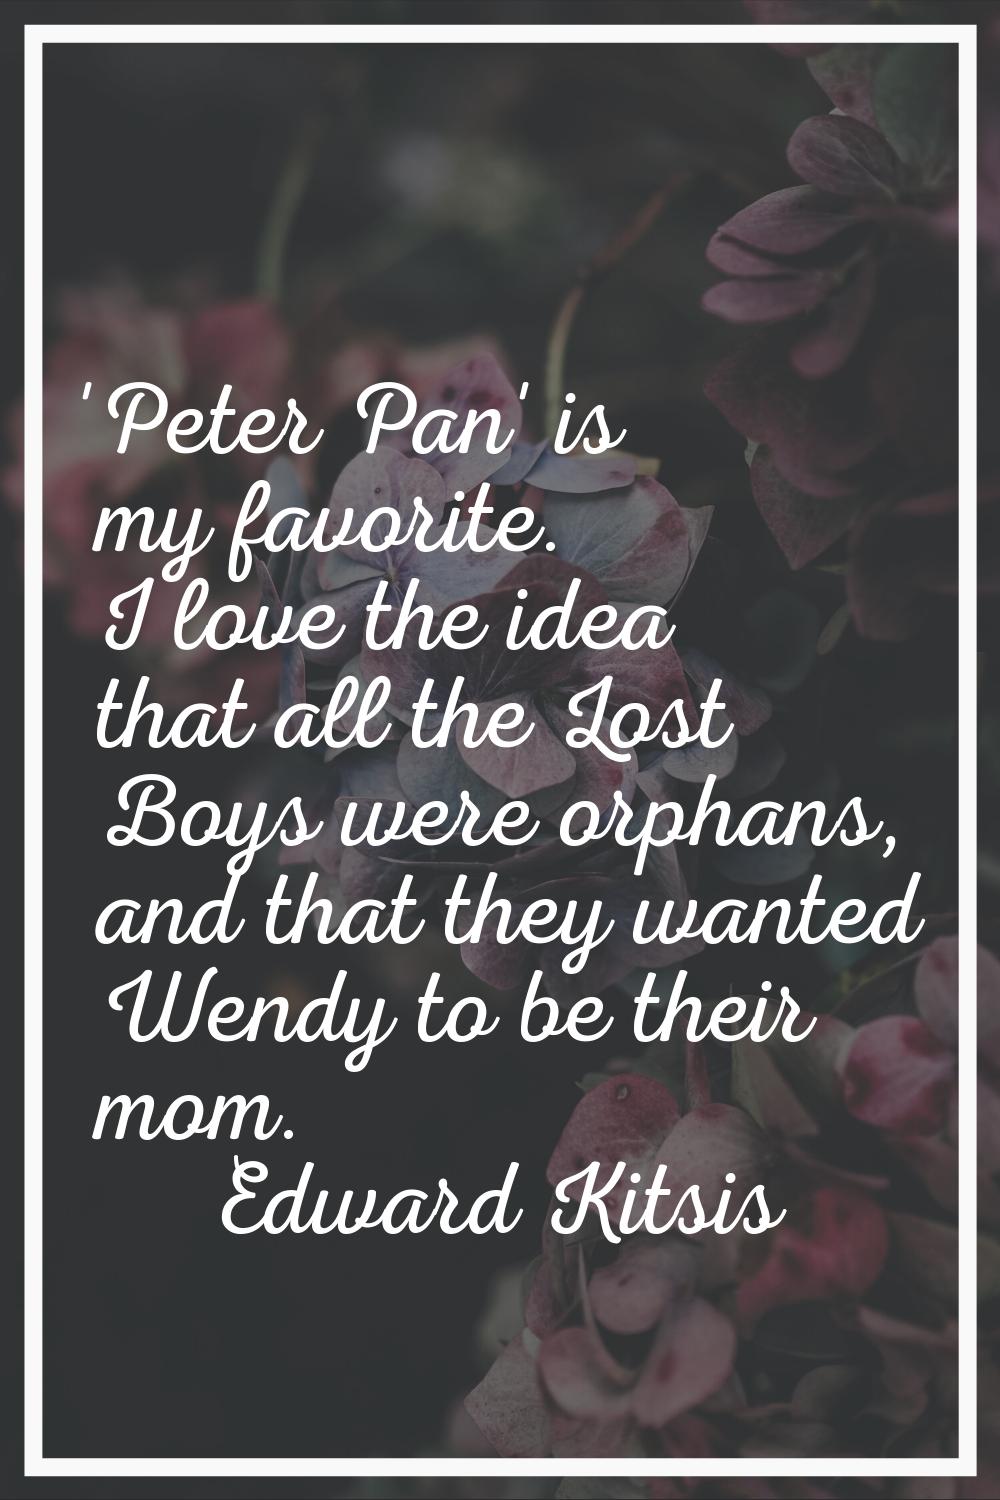 'Peter Pan' is my favorite. I love the idea that all the Lost Boys were orphans, and that they want